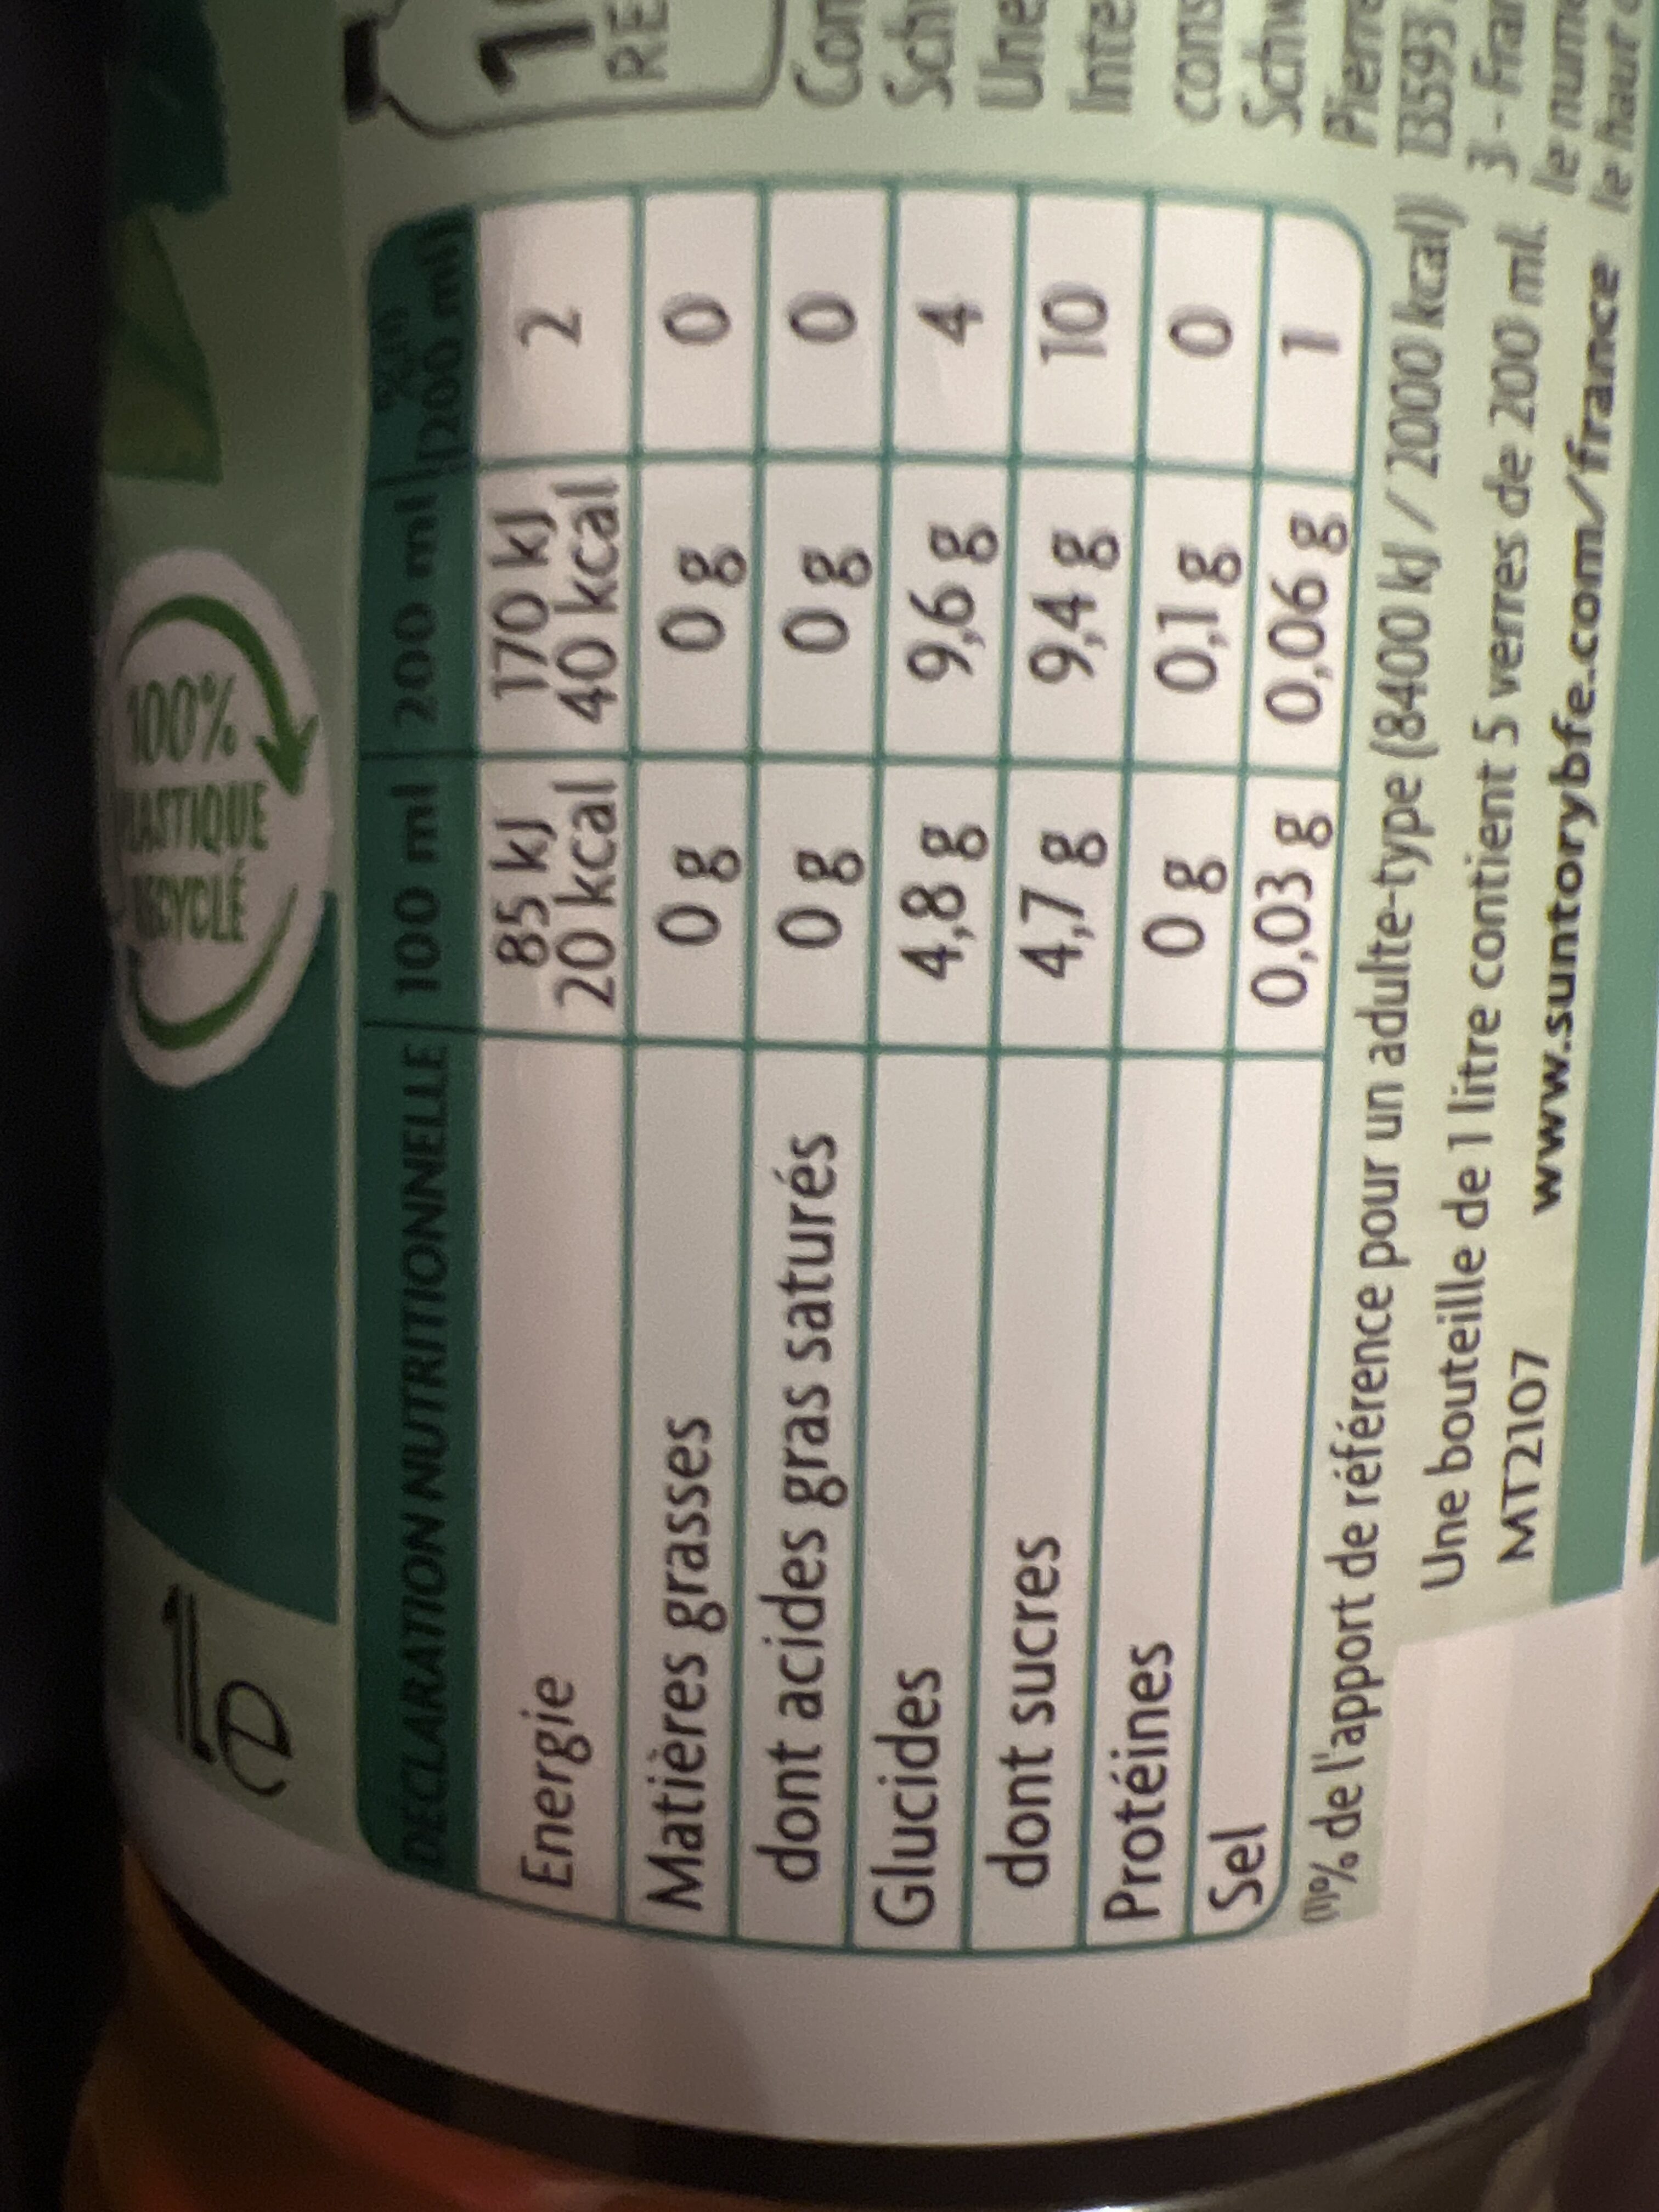 May tea saveur menthe - Nutrition facts - fr